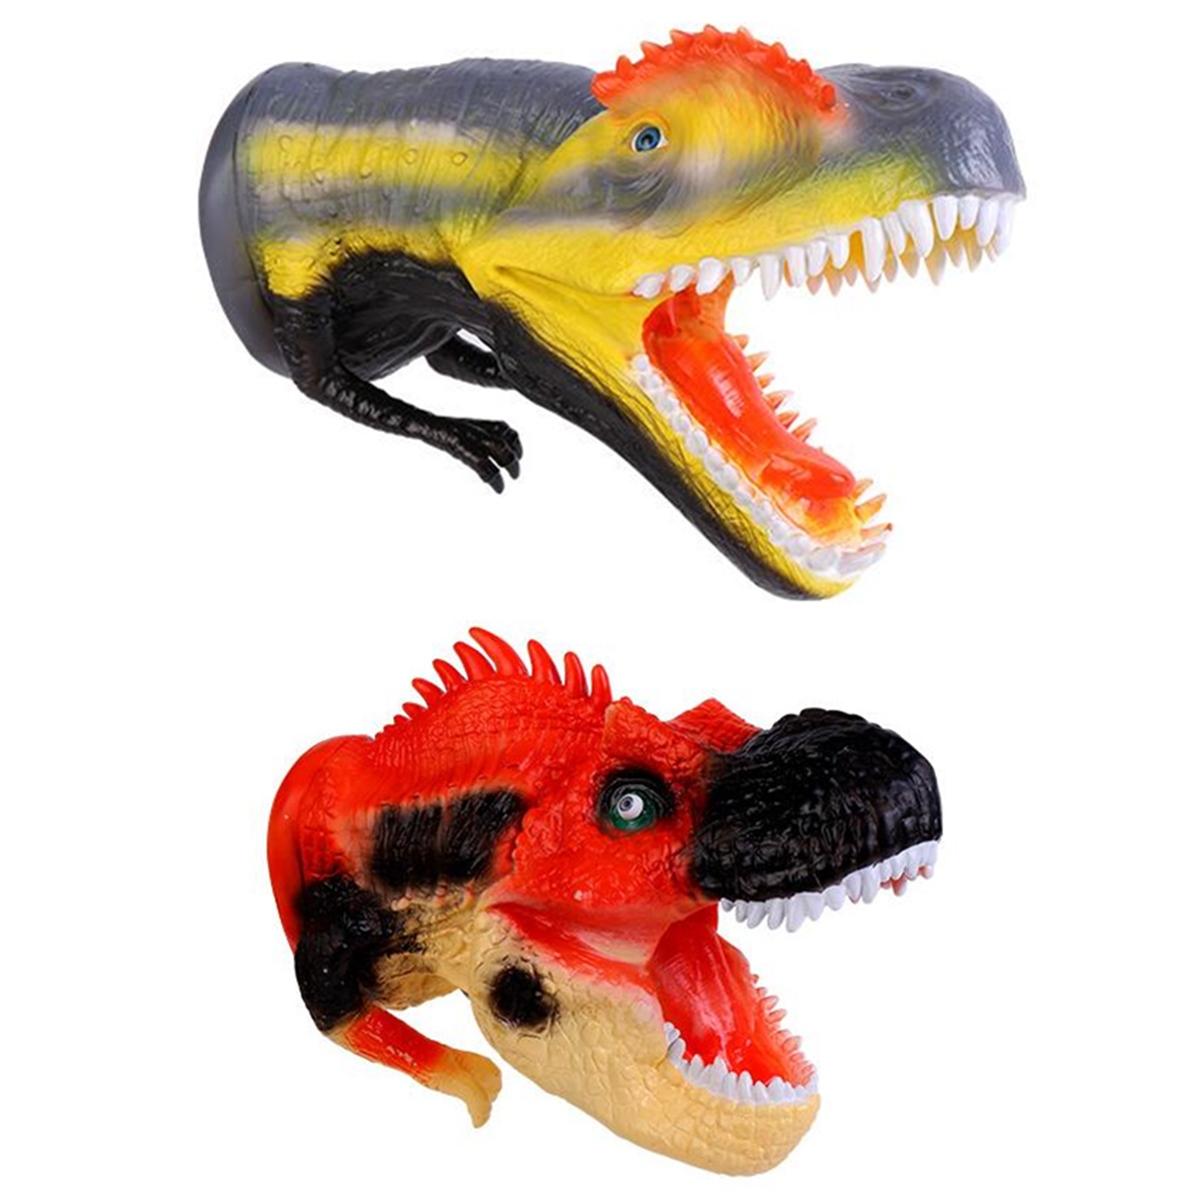 10" SUPER Dinosaur Hand Puppet Realistic Details Jurassic Museum Play Toy Boxed 